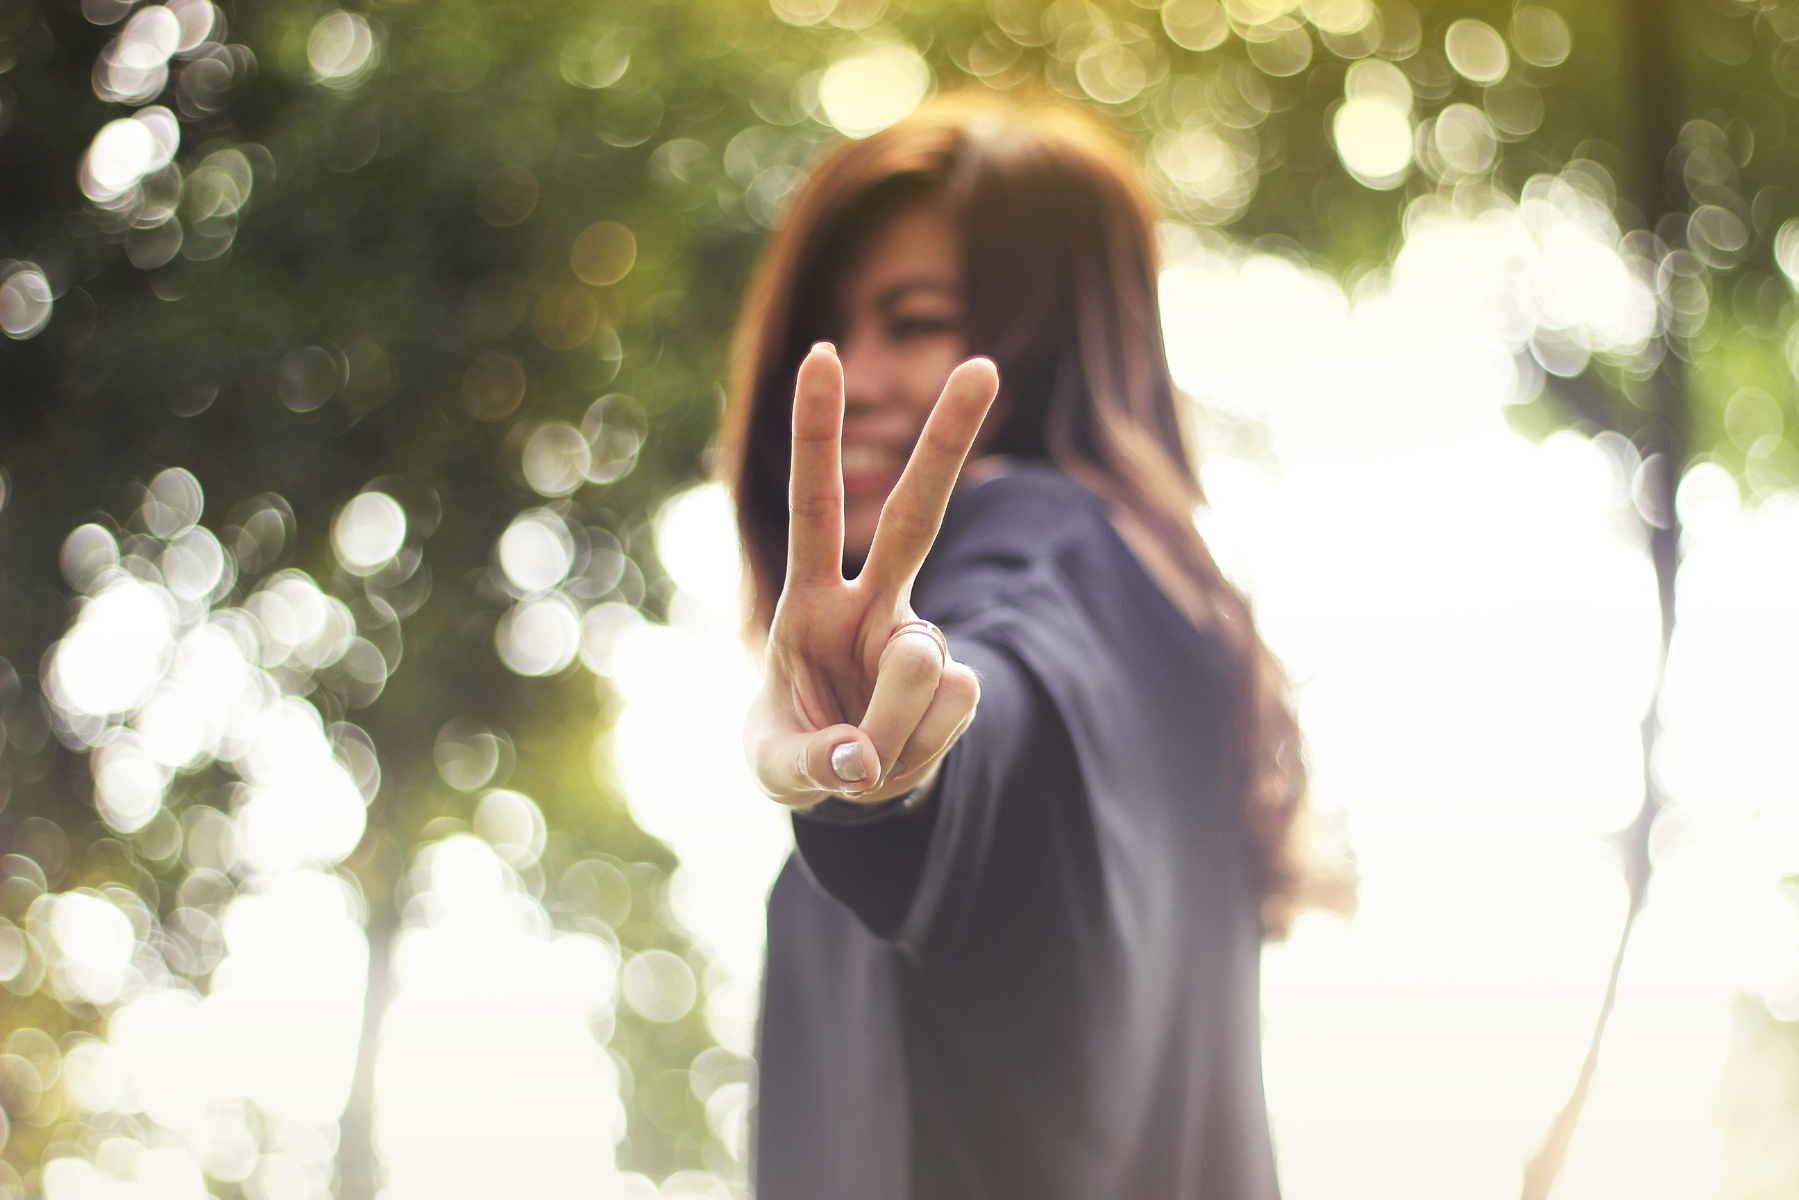 A tween or teen girl with brown hair and skin wearing a gray shirt stands outside near trees holding up a peace sign to the camera.